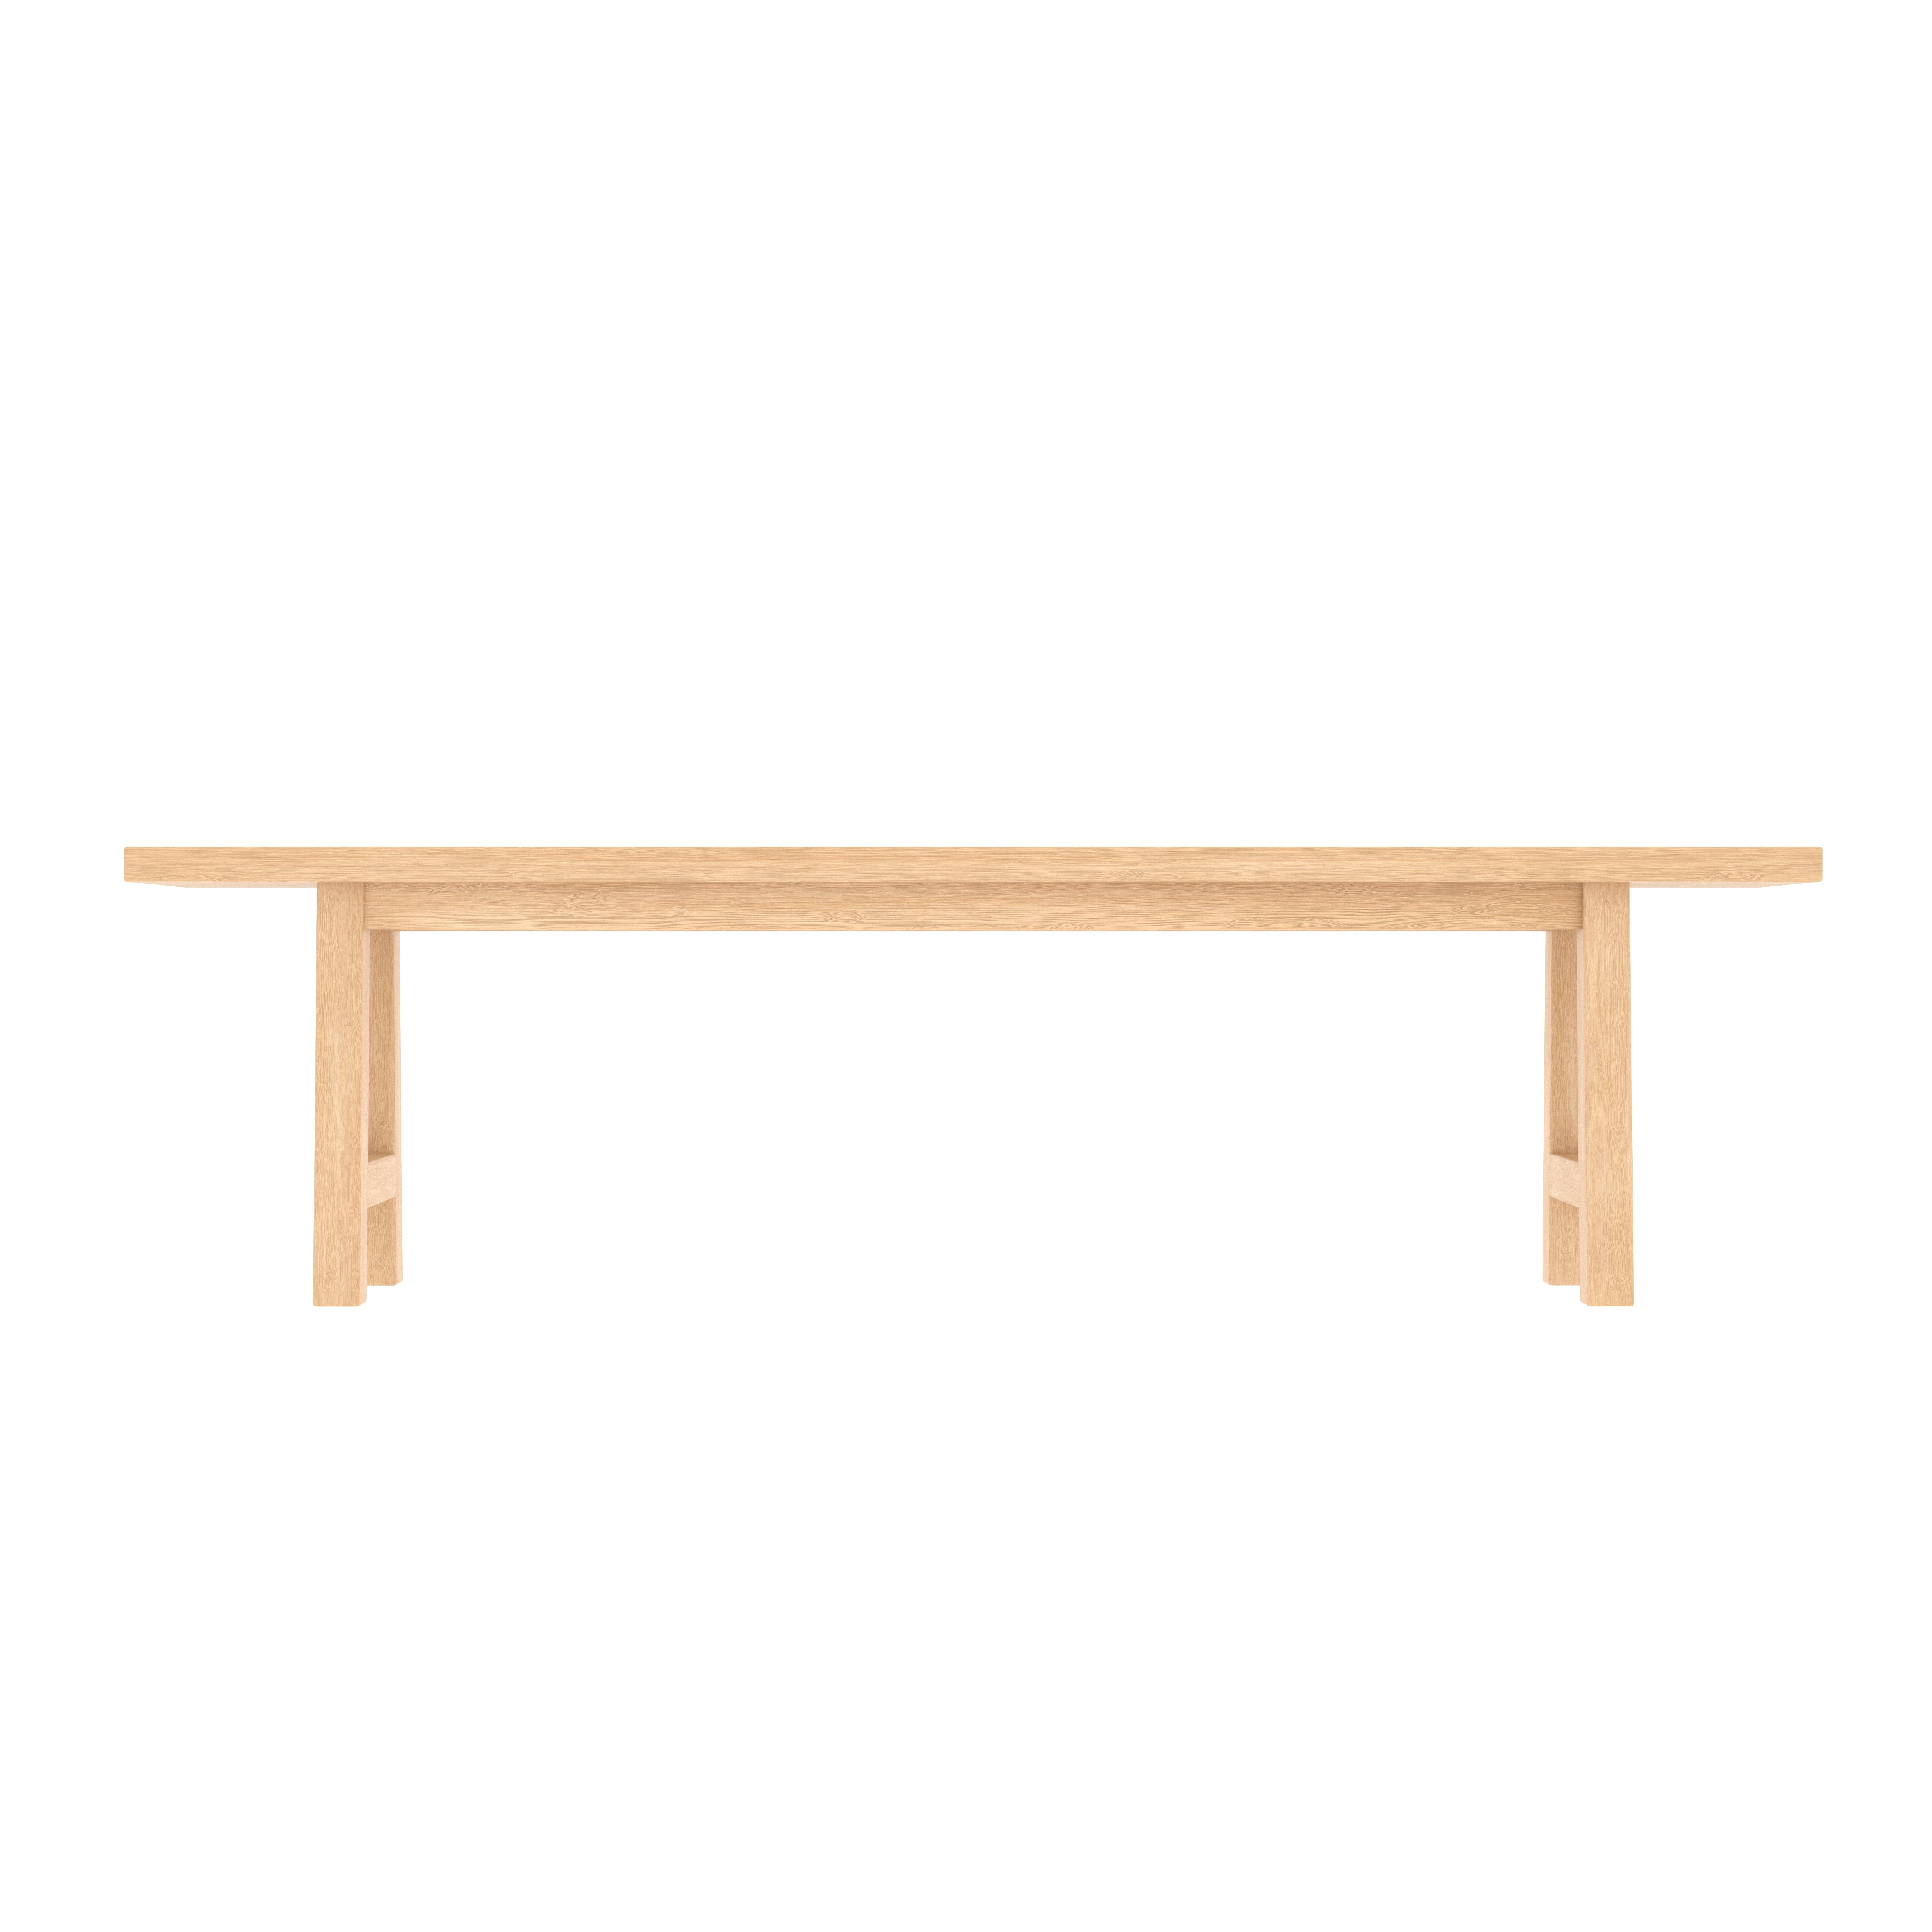 Simple Plain Natural Brown Finished Handmade Wooden Bench Bench